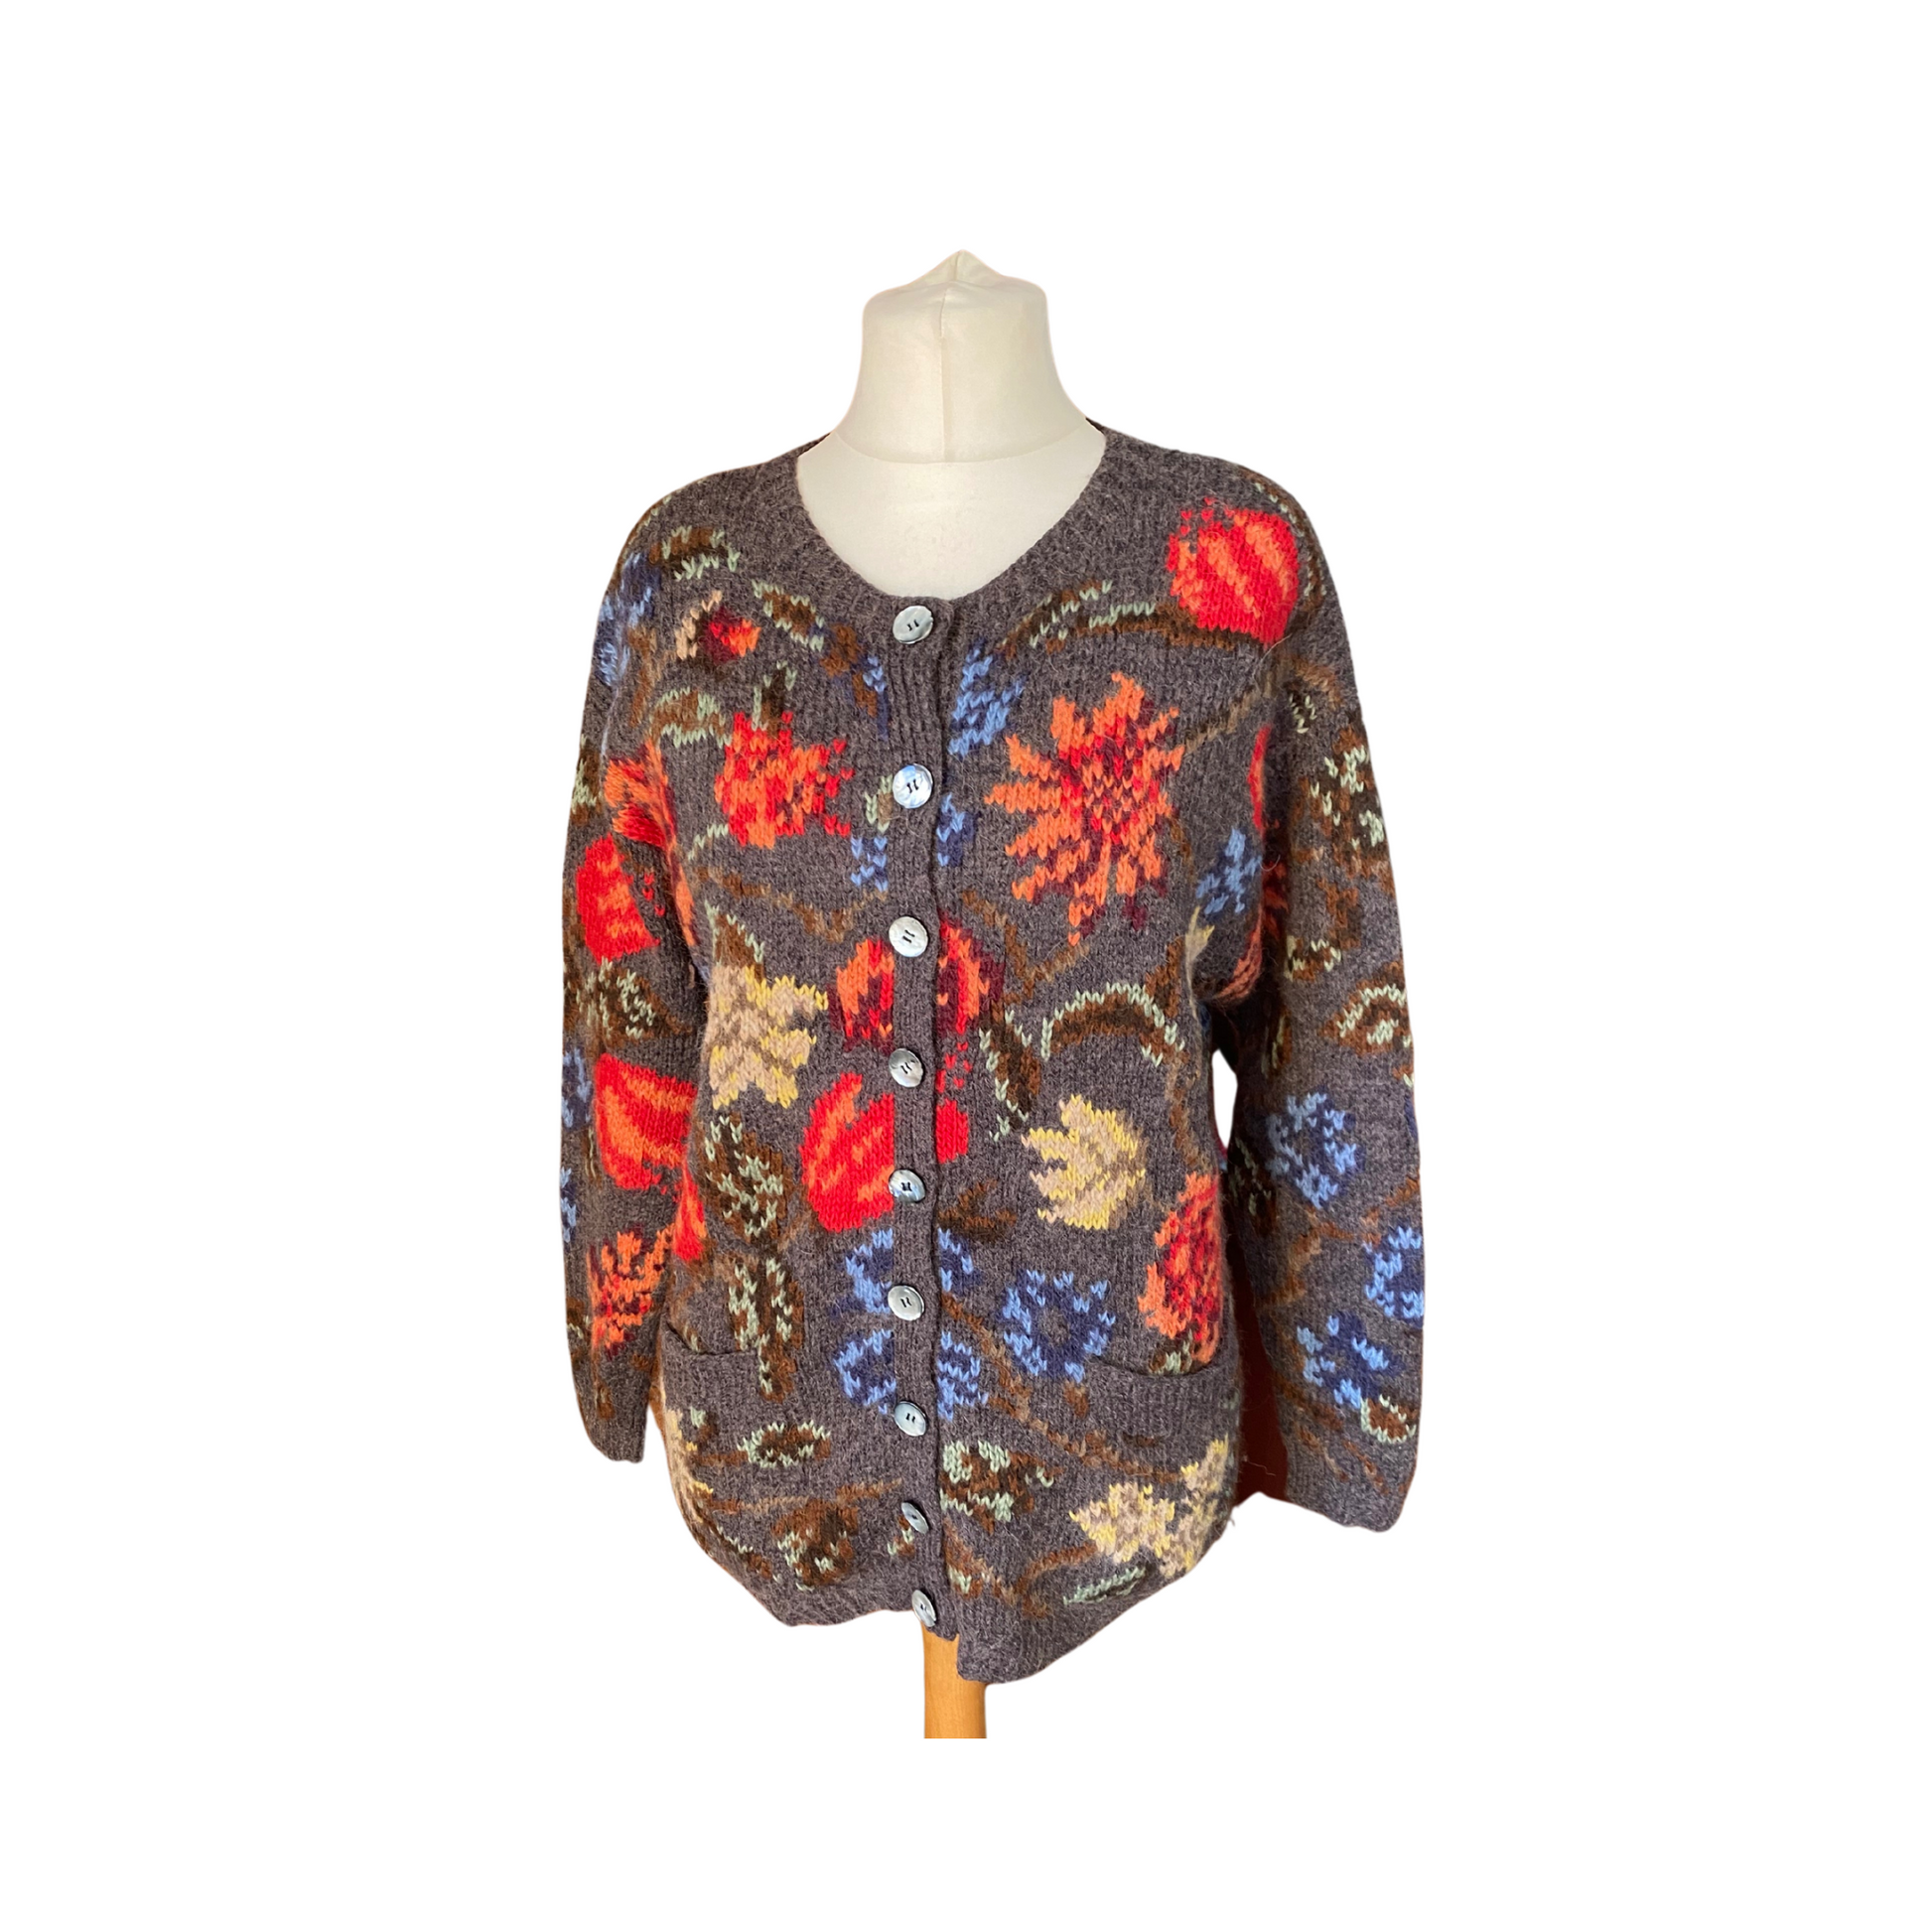 Chunky charcoal cardigan with vibrant floral pattern, perfect for adding a pop of colour to your outfit.